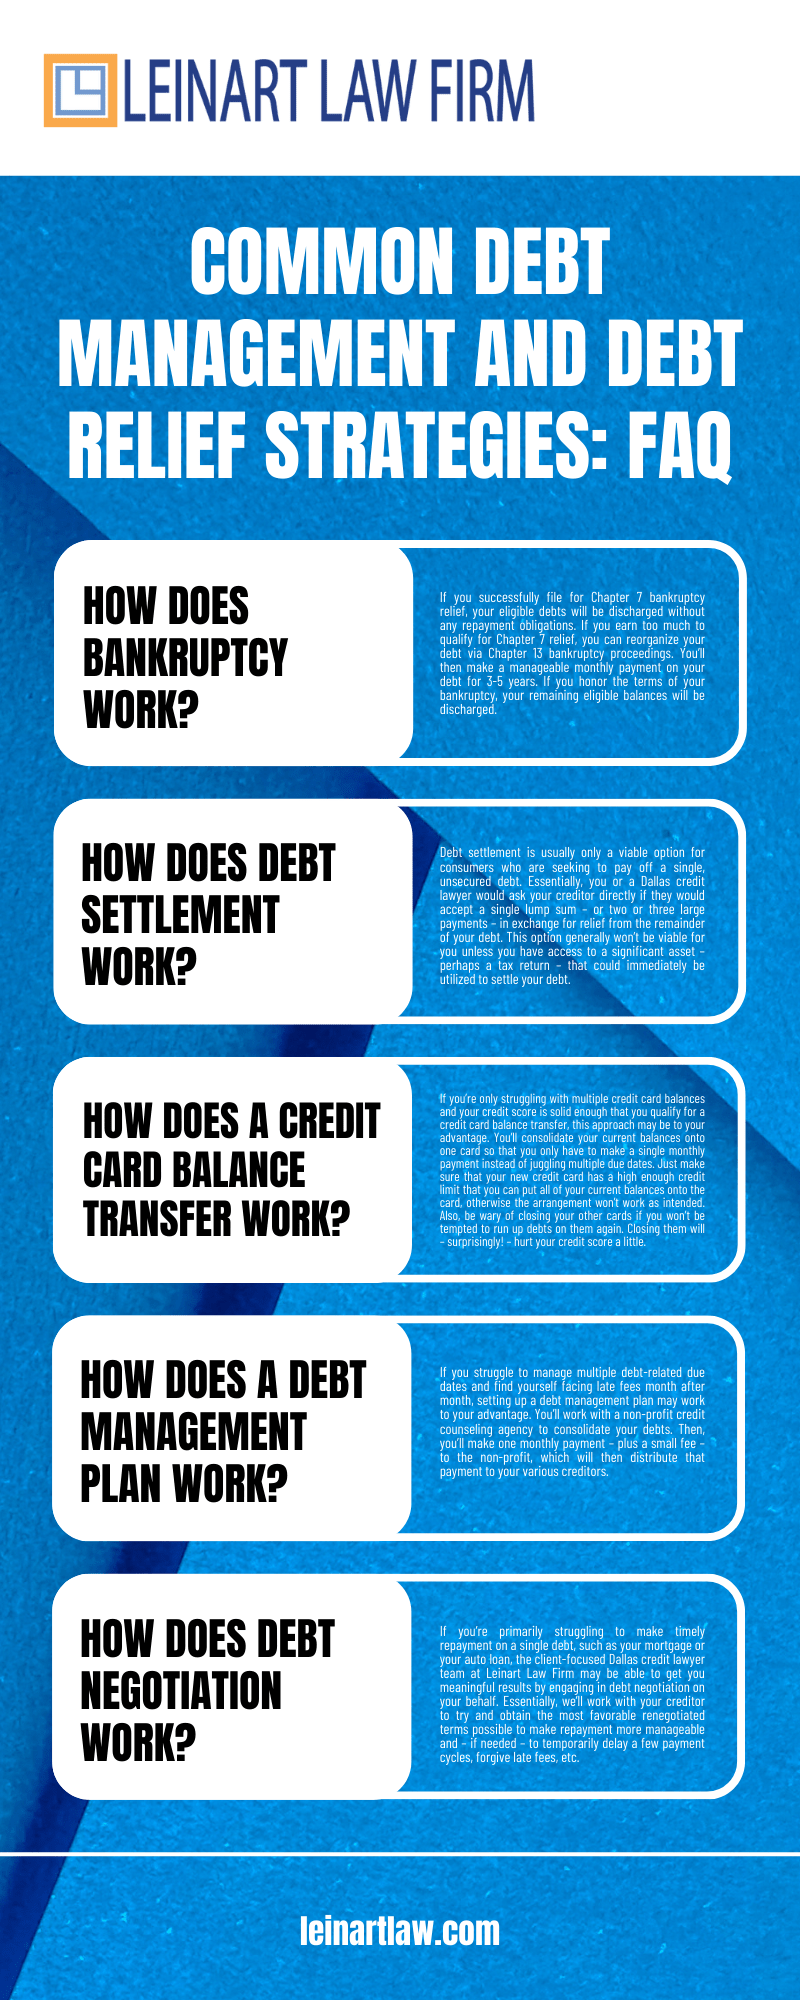 Common Debt Management and Debt Relief Strategies Infographic